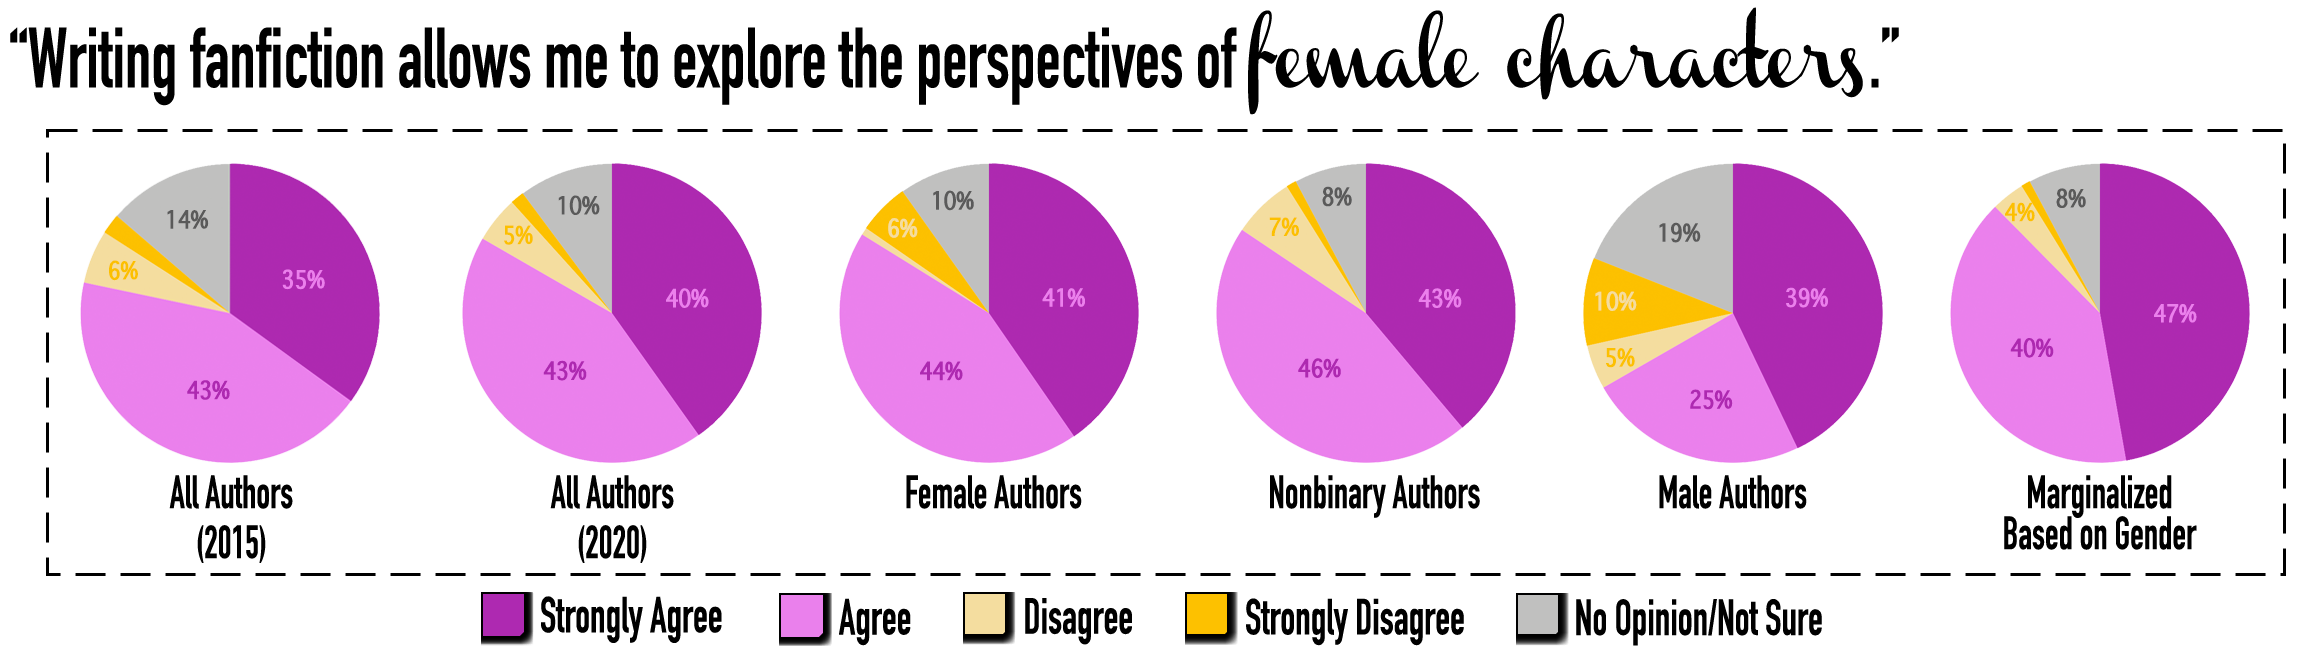 "Writing fanfiction allows me to explore the perspective of female characters" with six pie charts; see the data in the Appendix.